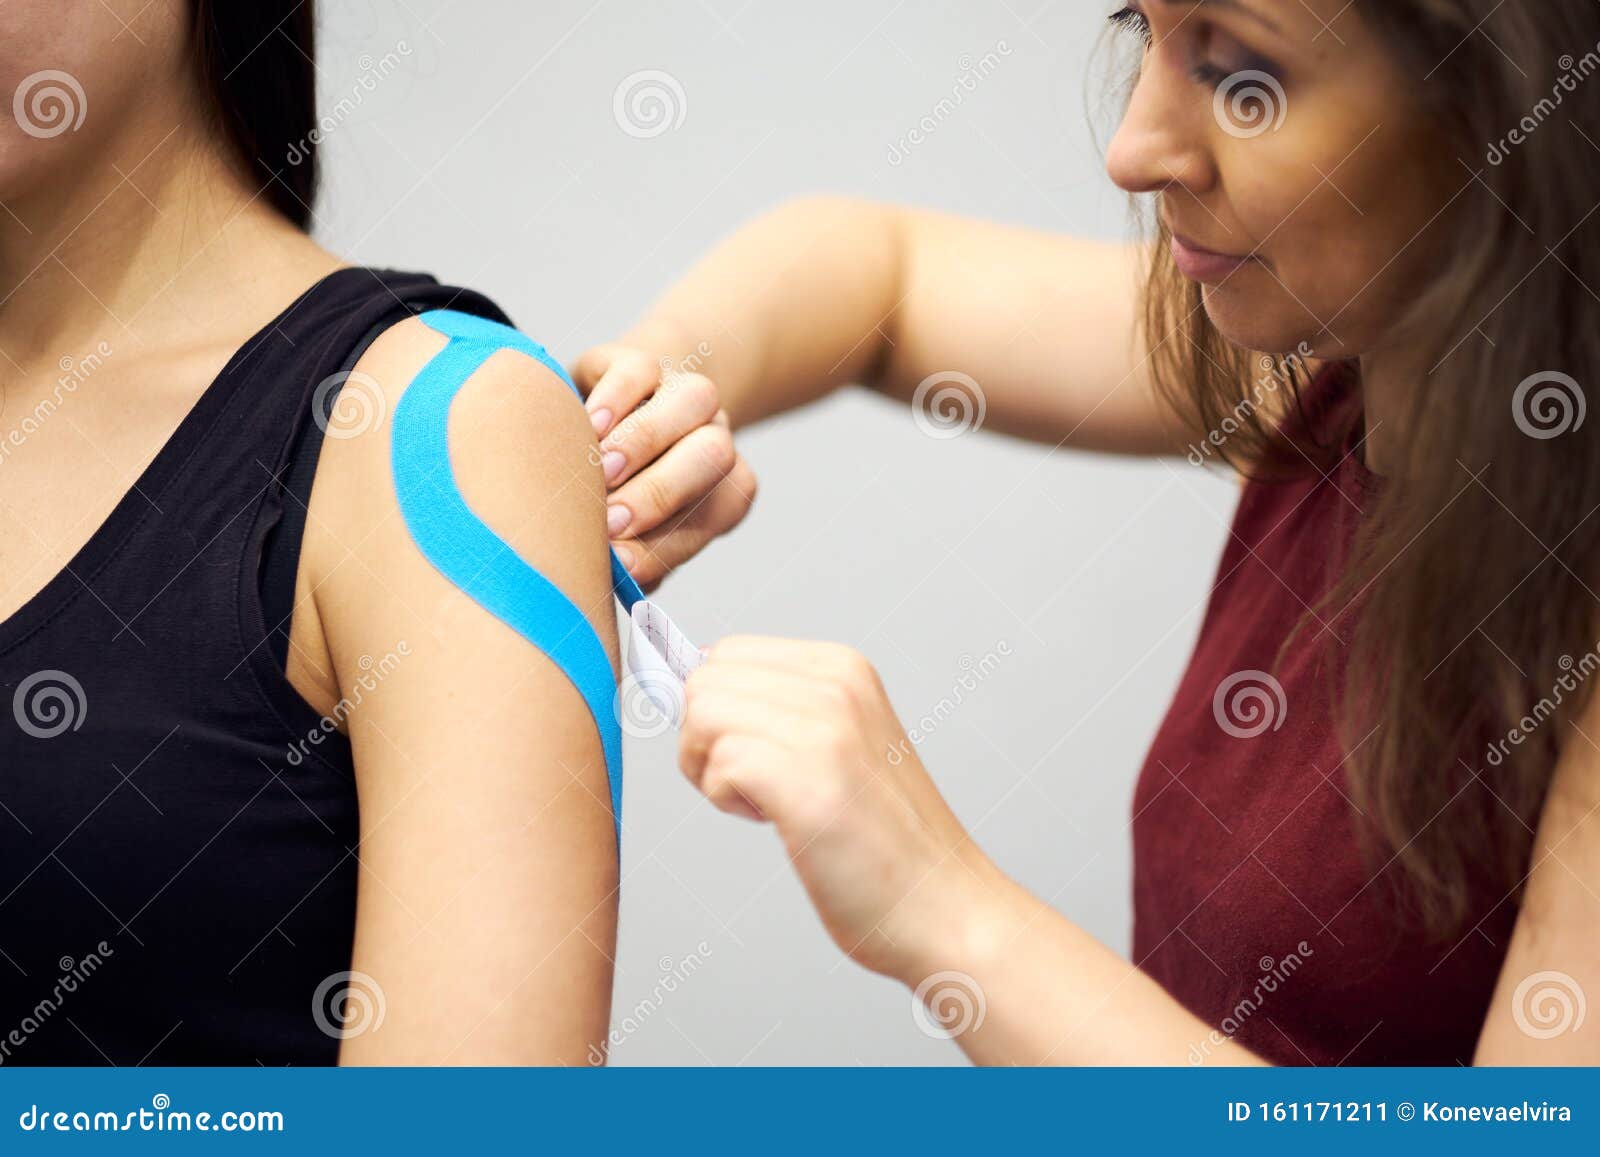 Kinesiology Taping Treatment with Blue Tape Female Patient Injured Arm. Sports Injury Kinesio Treatment Stock Image - Image of knee, injury: 161171211